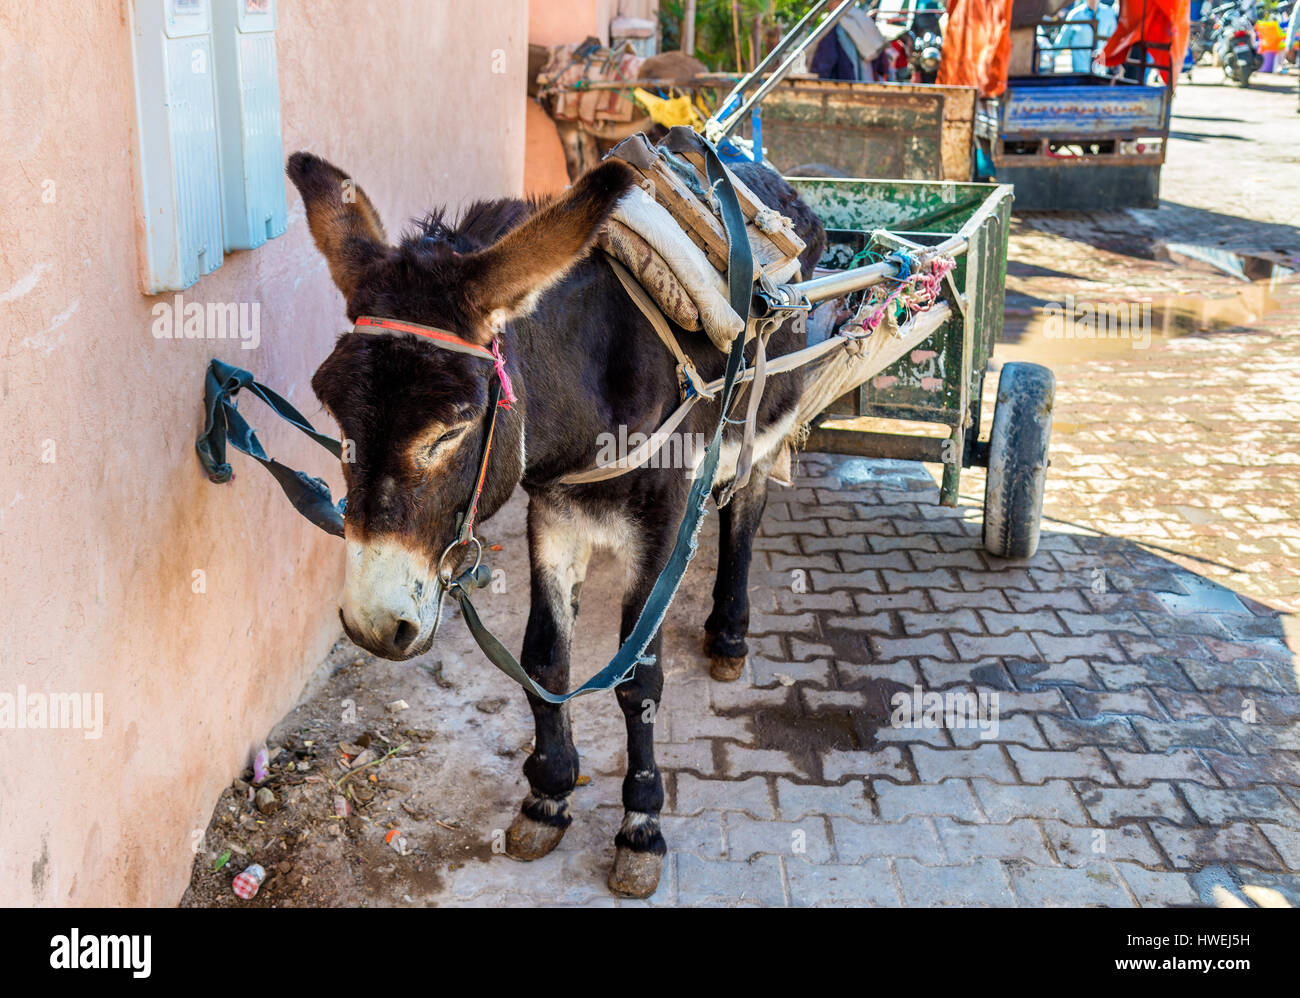 Working donkey with a cart on a street of Marrakesh, Morocco Stock Photo